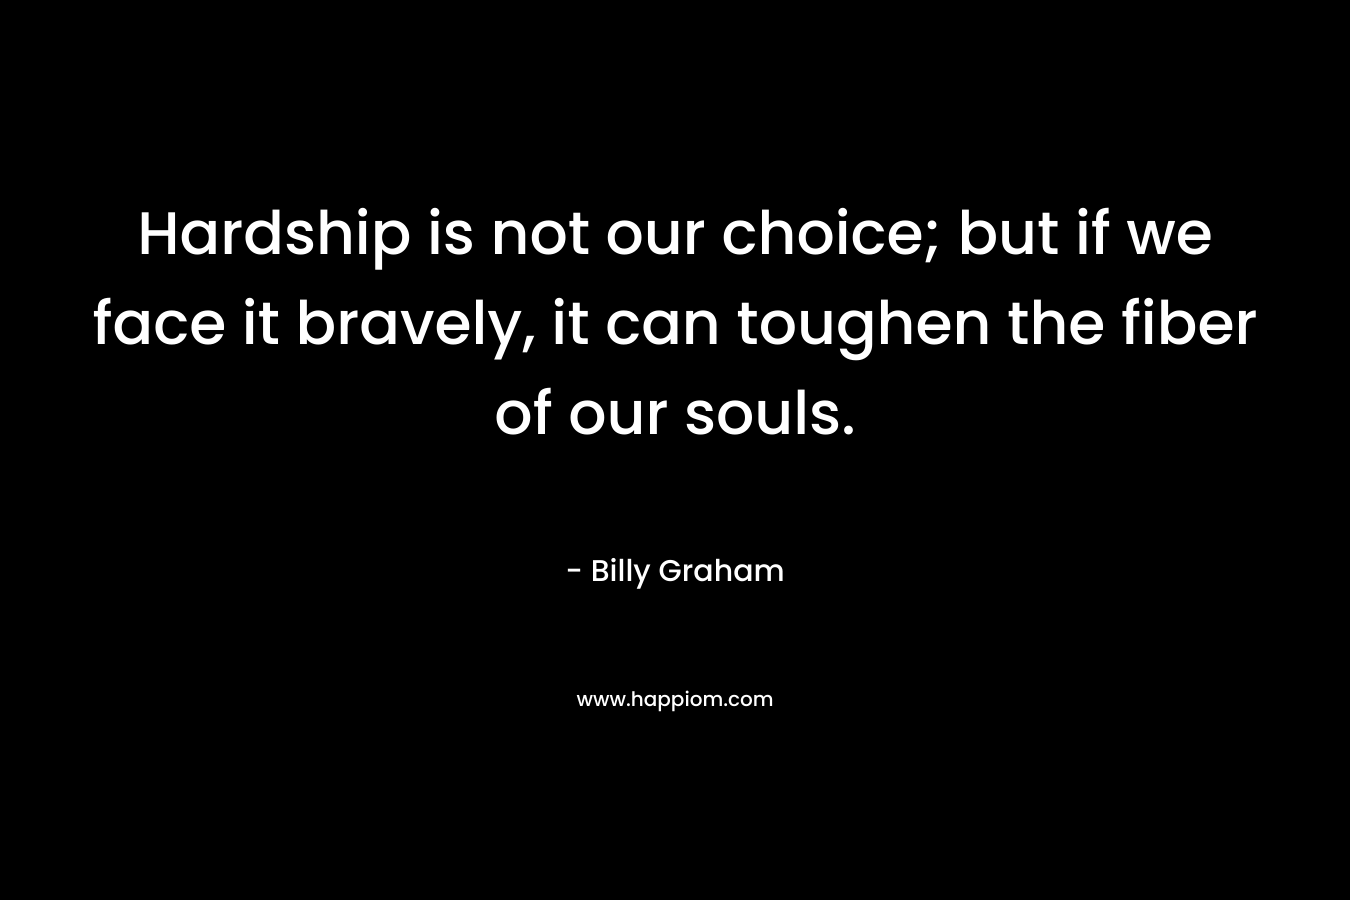 Hardship is not our choice; but if we face it bravely, it can toughen the fiber of our souls. – Billy Graham